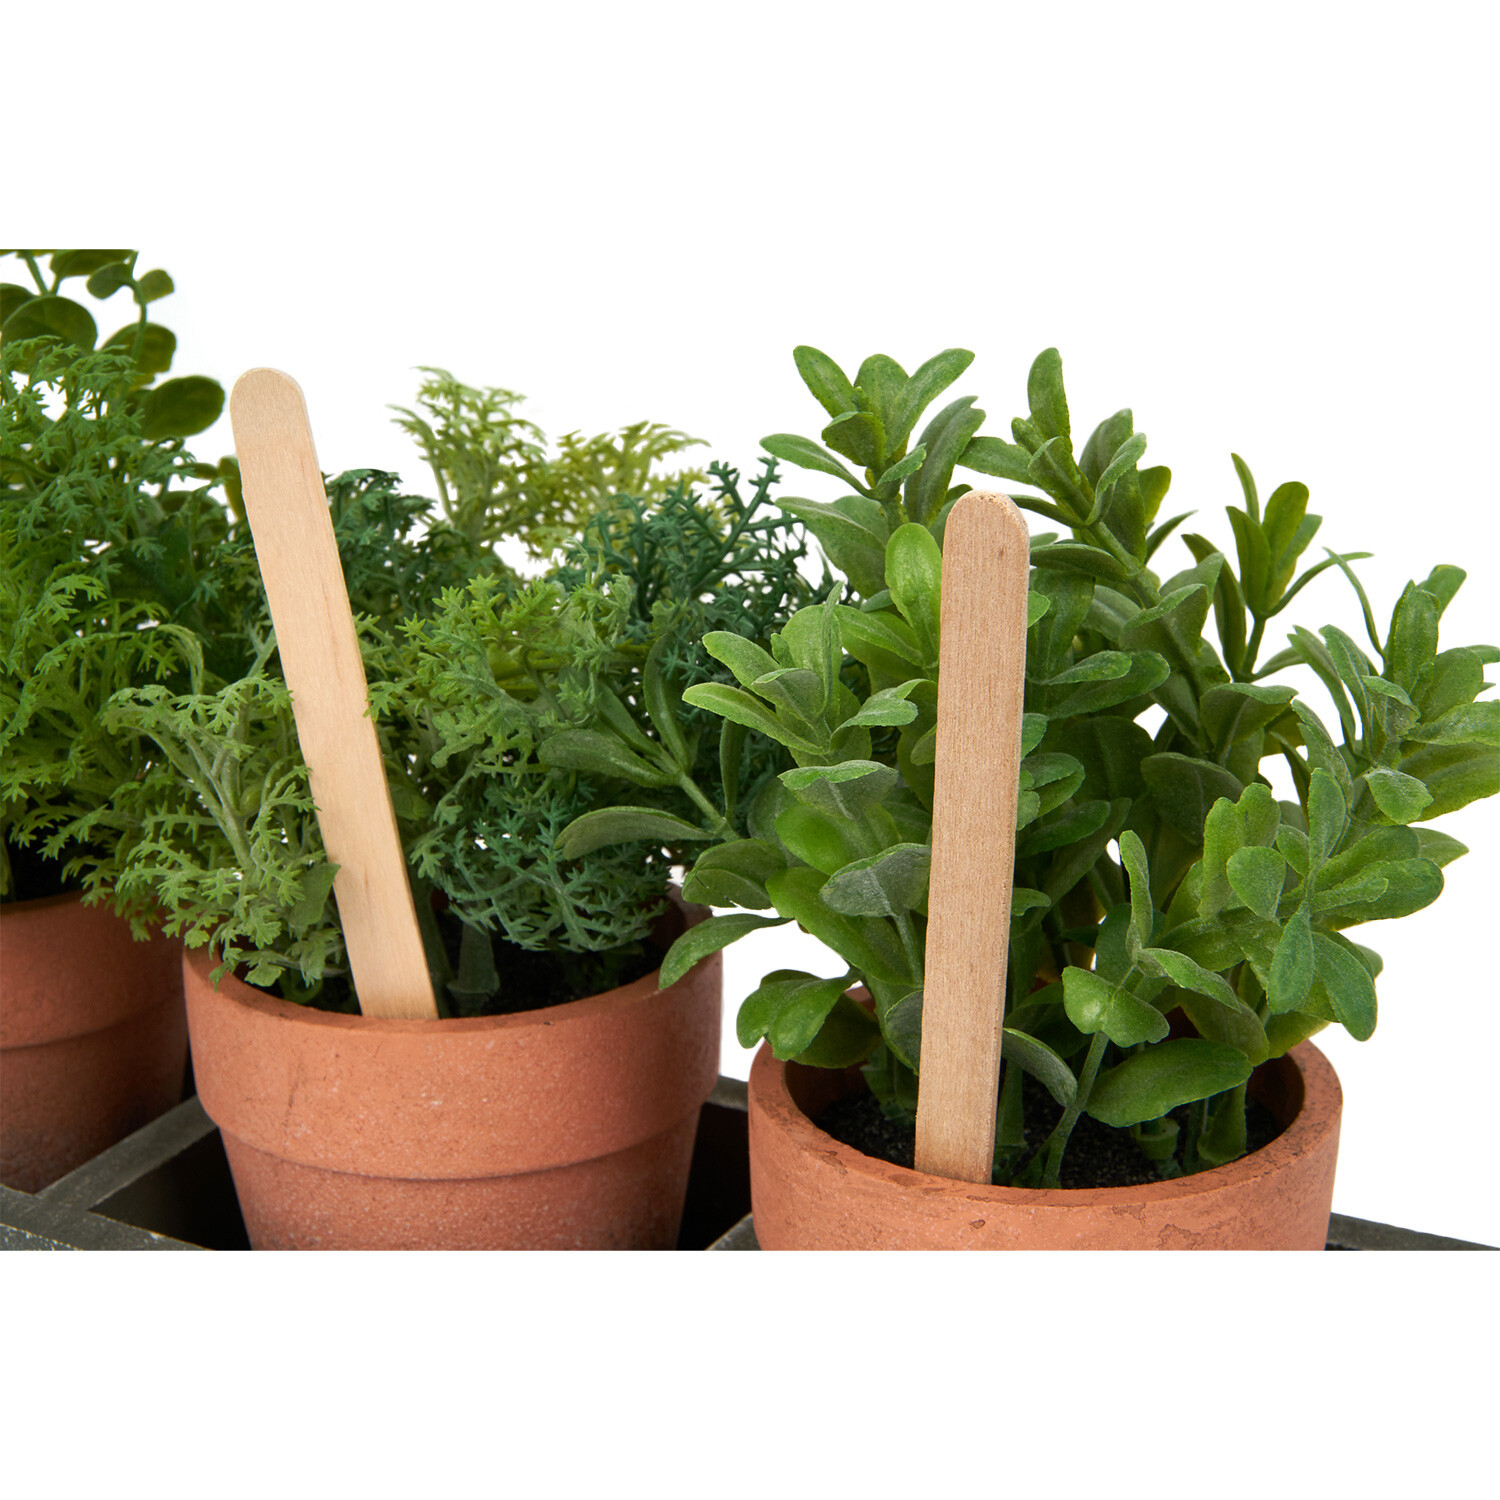 Set of 3 Potted Herbs in Tray - Grey Image 2